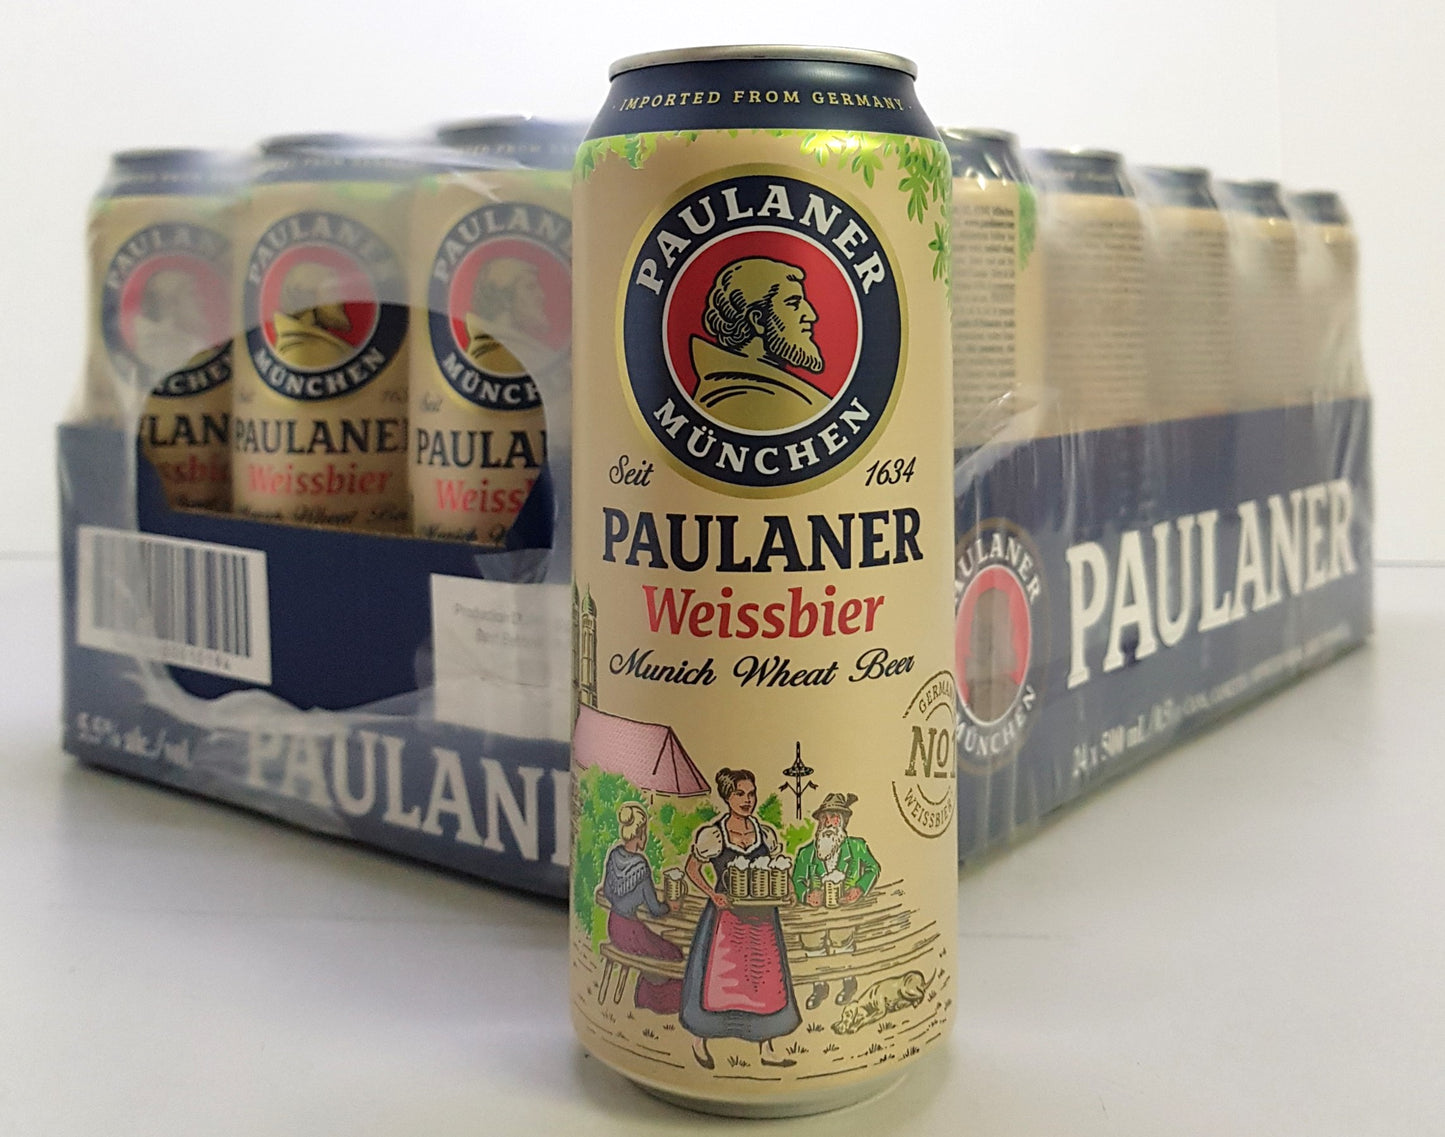 Paulaner Weissbier - 5.5% abv - Canned Version